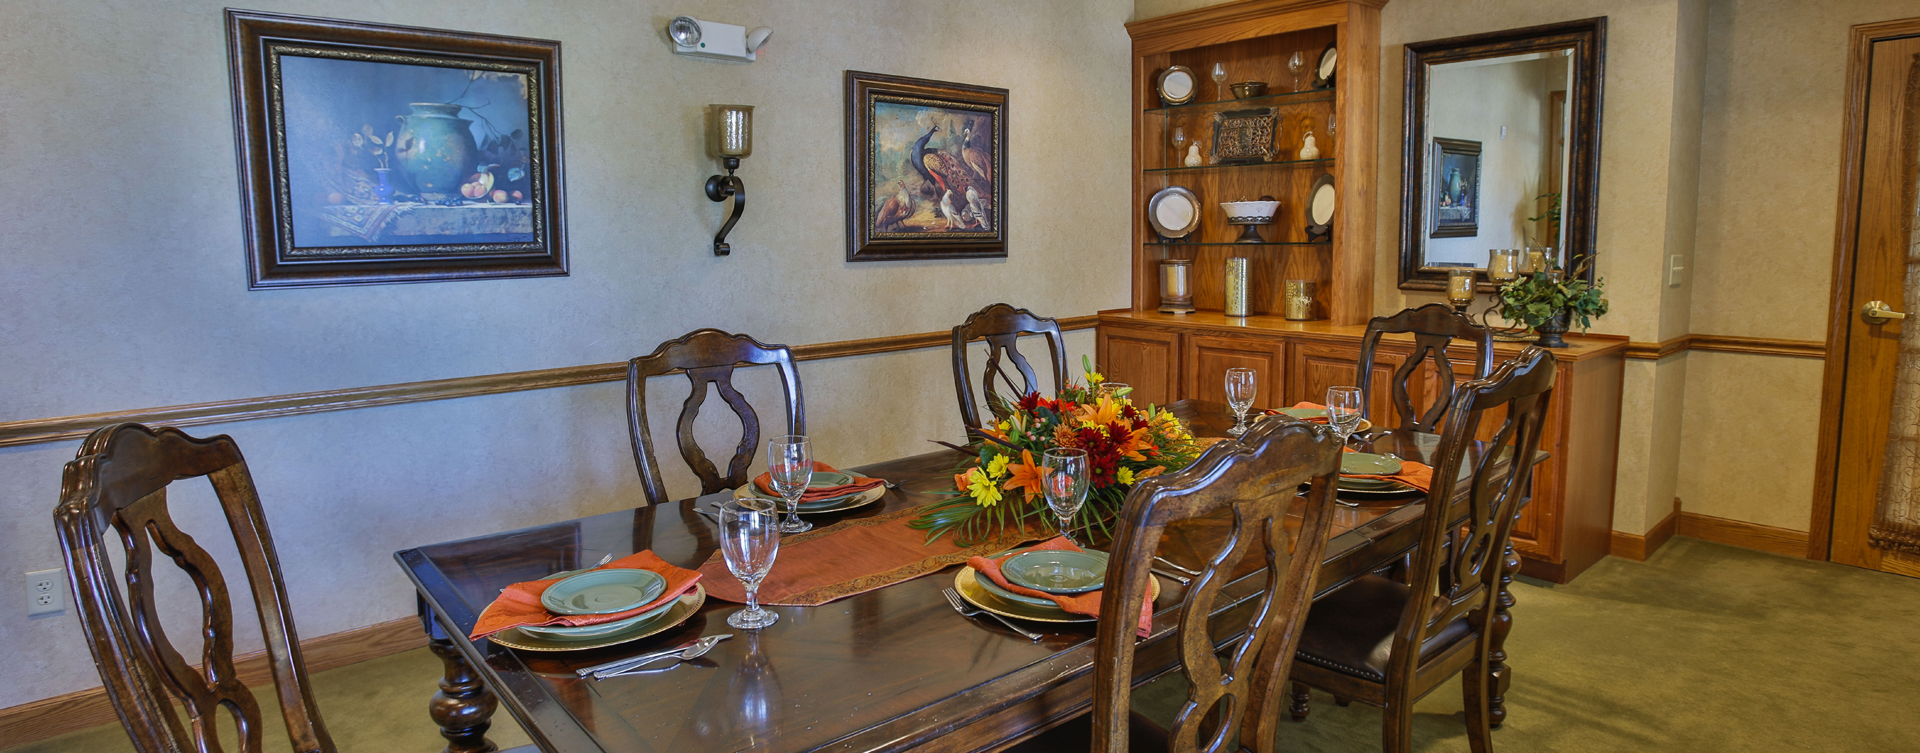 Celebrate special occasions in the private dining room at Bickford of Peoria